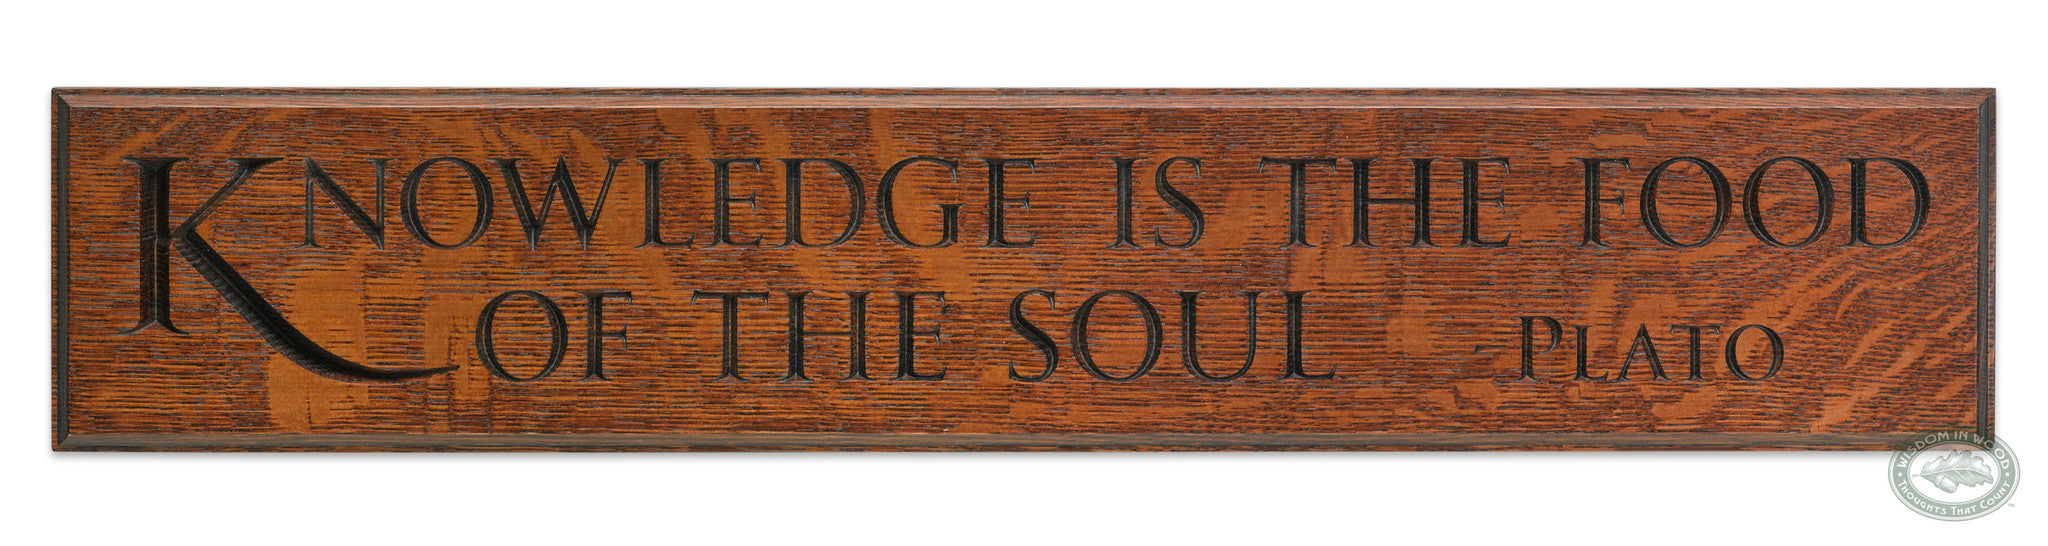 "Knowledge is the food of the soul " Plato Carved Quote Wall Art